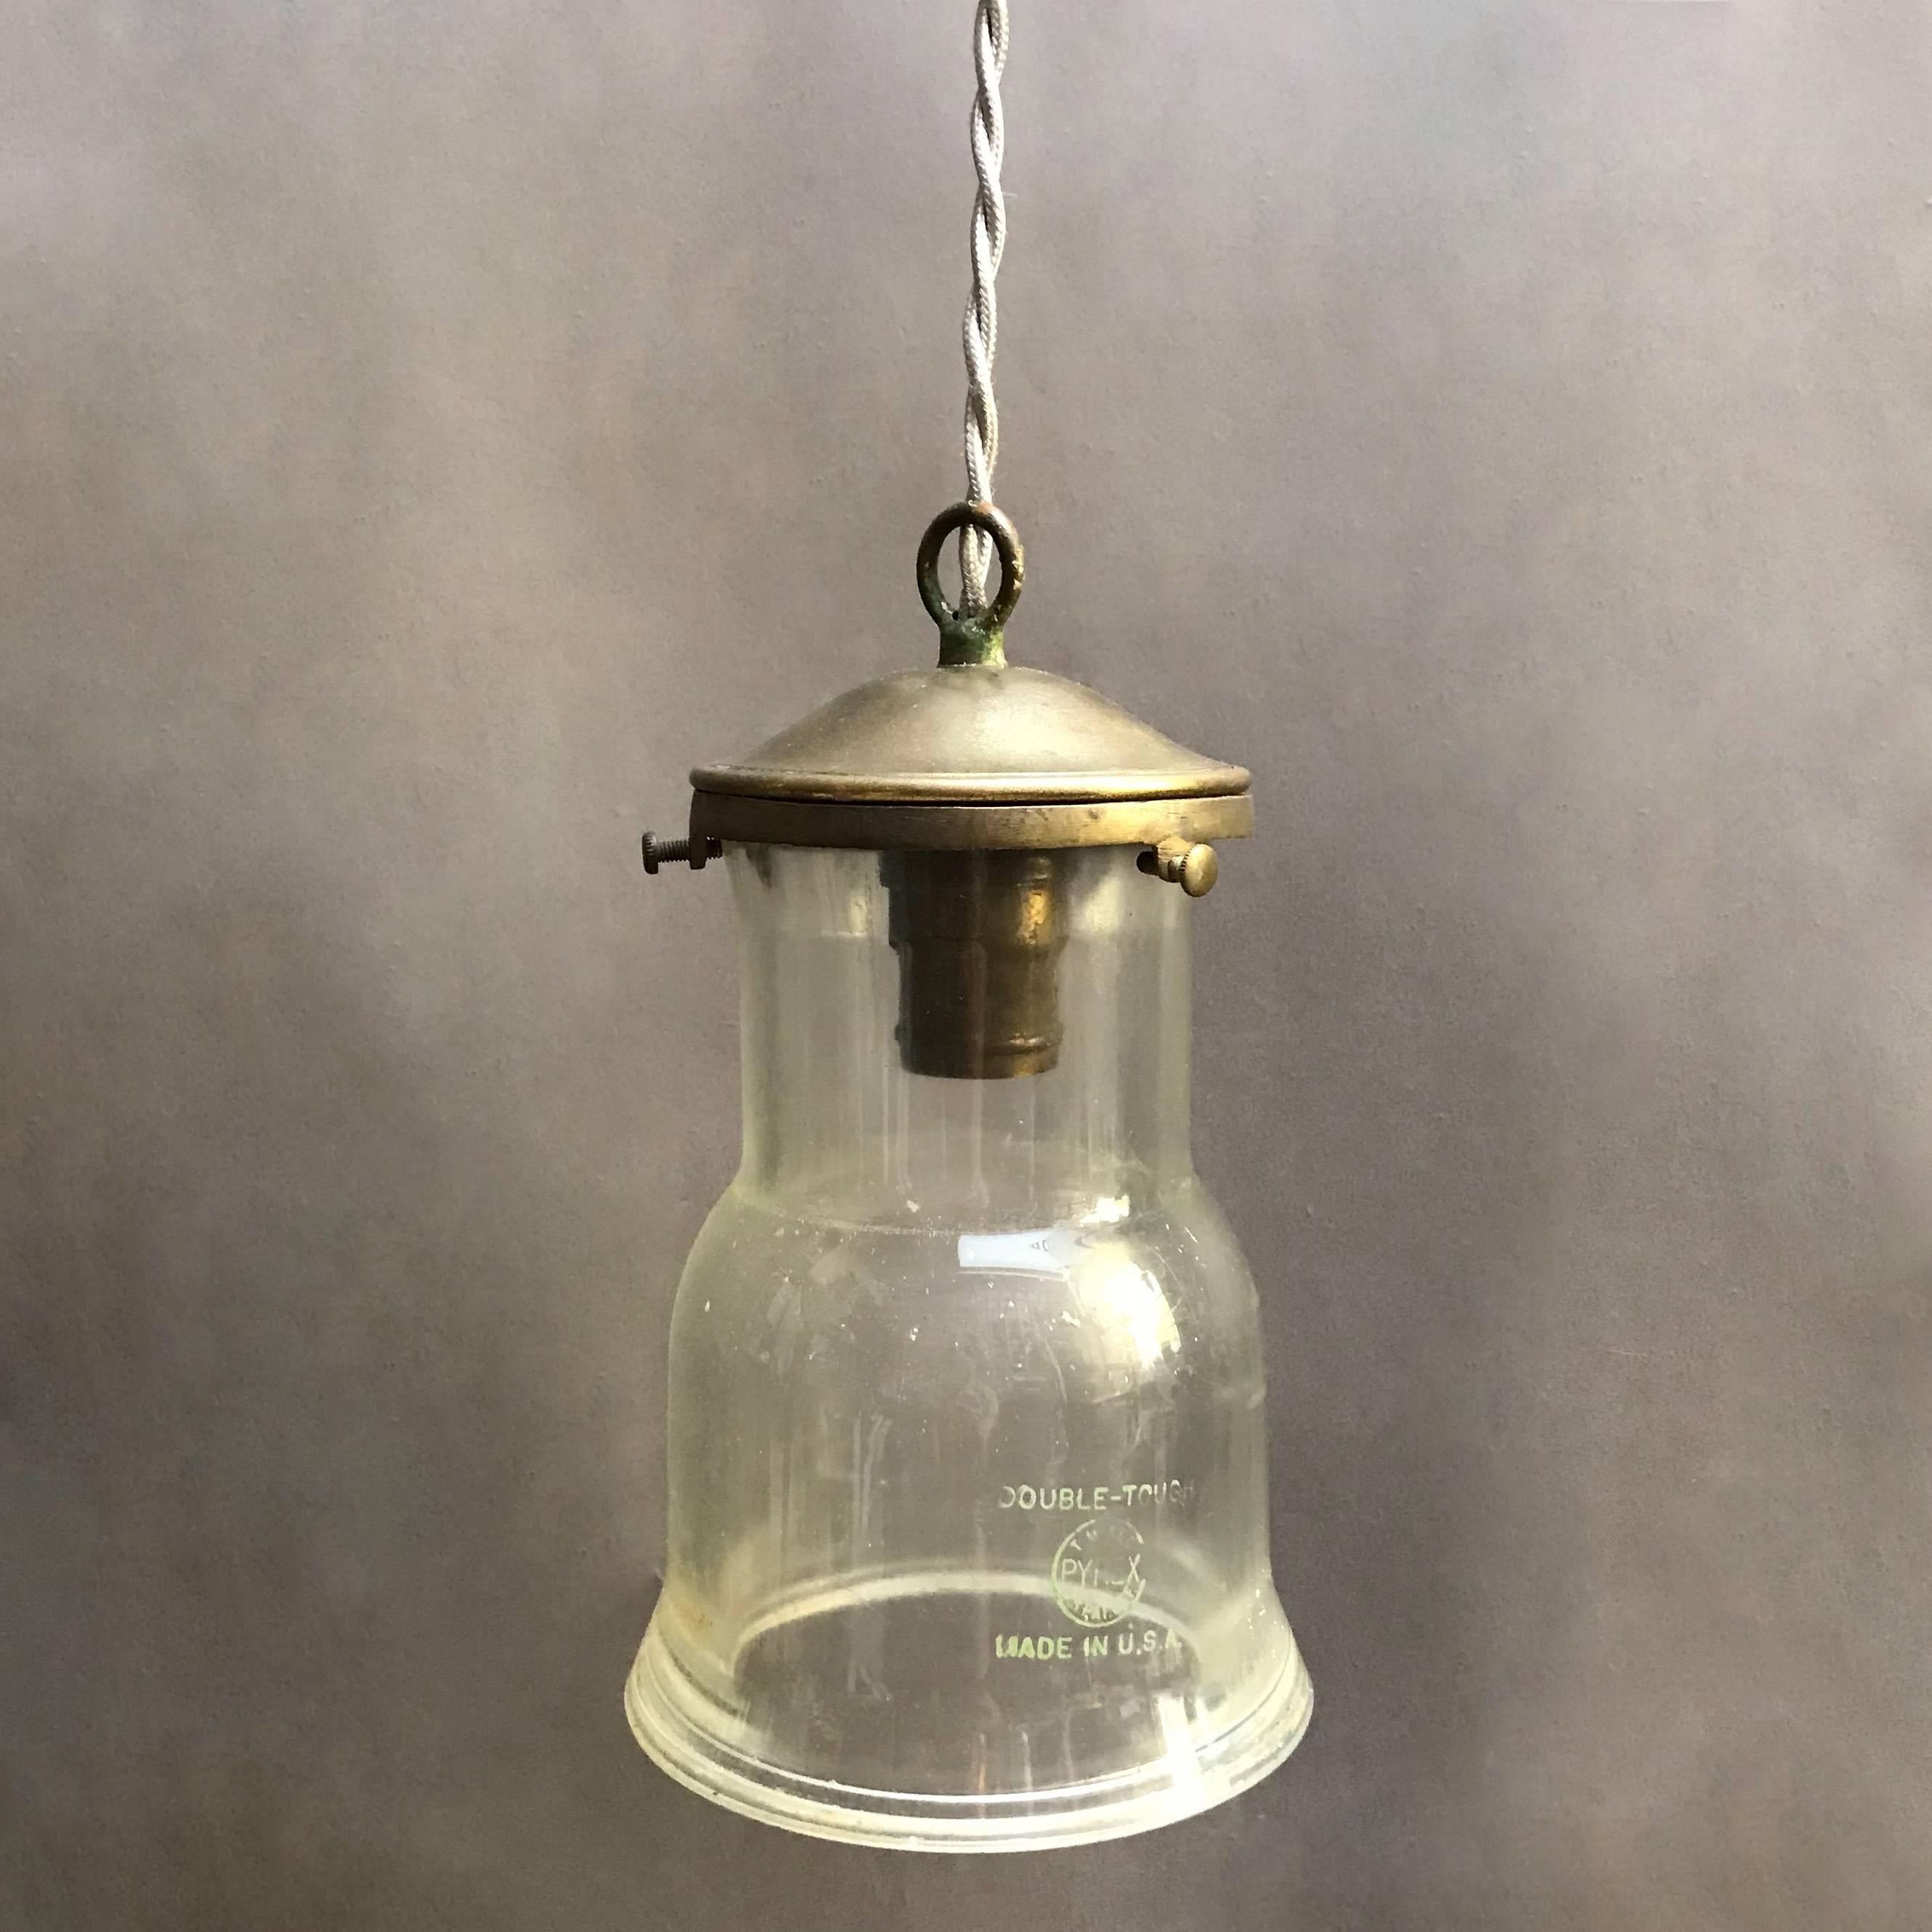 Custom, industrial pendant light features a Pyrex glass shade with brass fitter is newly wired with 36 inches of grey braided cloth cord to accept up to a 150 watt bulb.